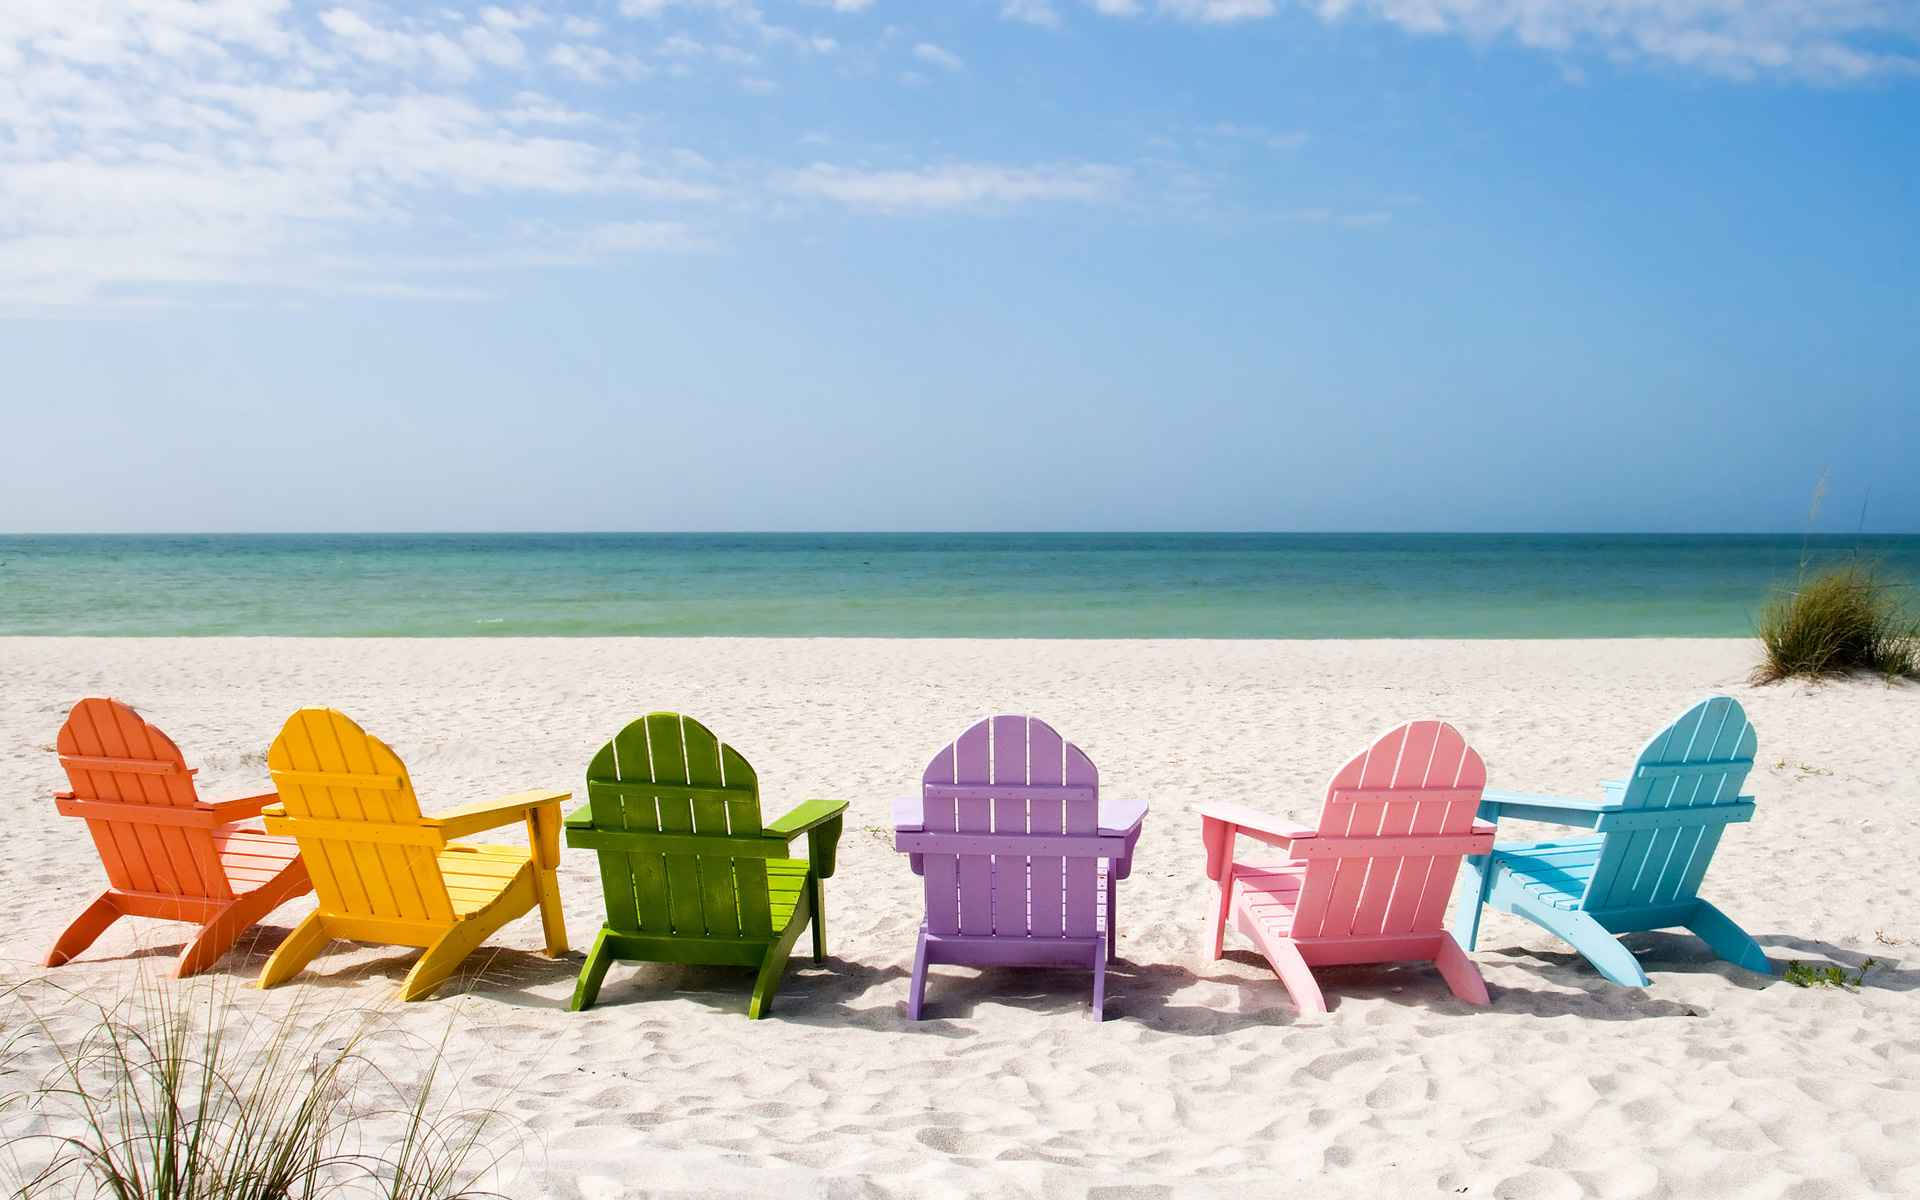 Florida Beach And Colorful Sunchairs Wallpaper